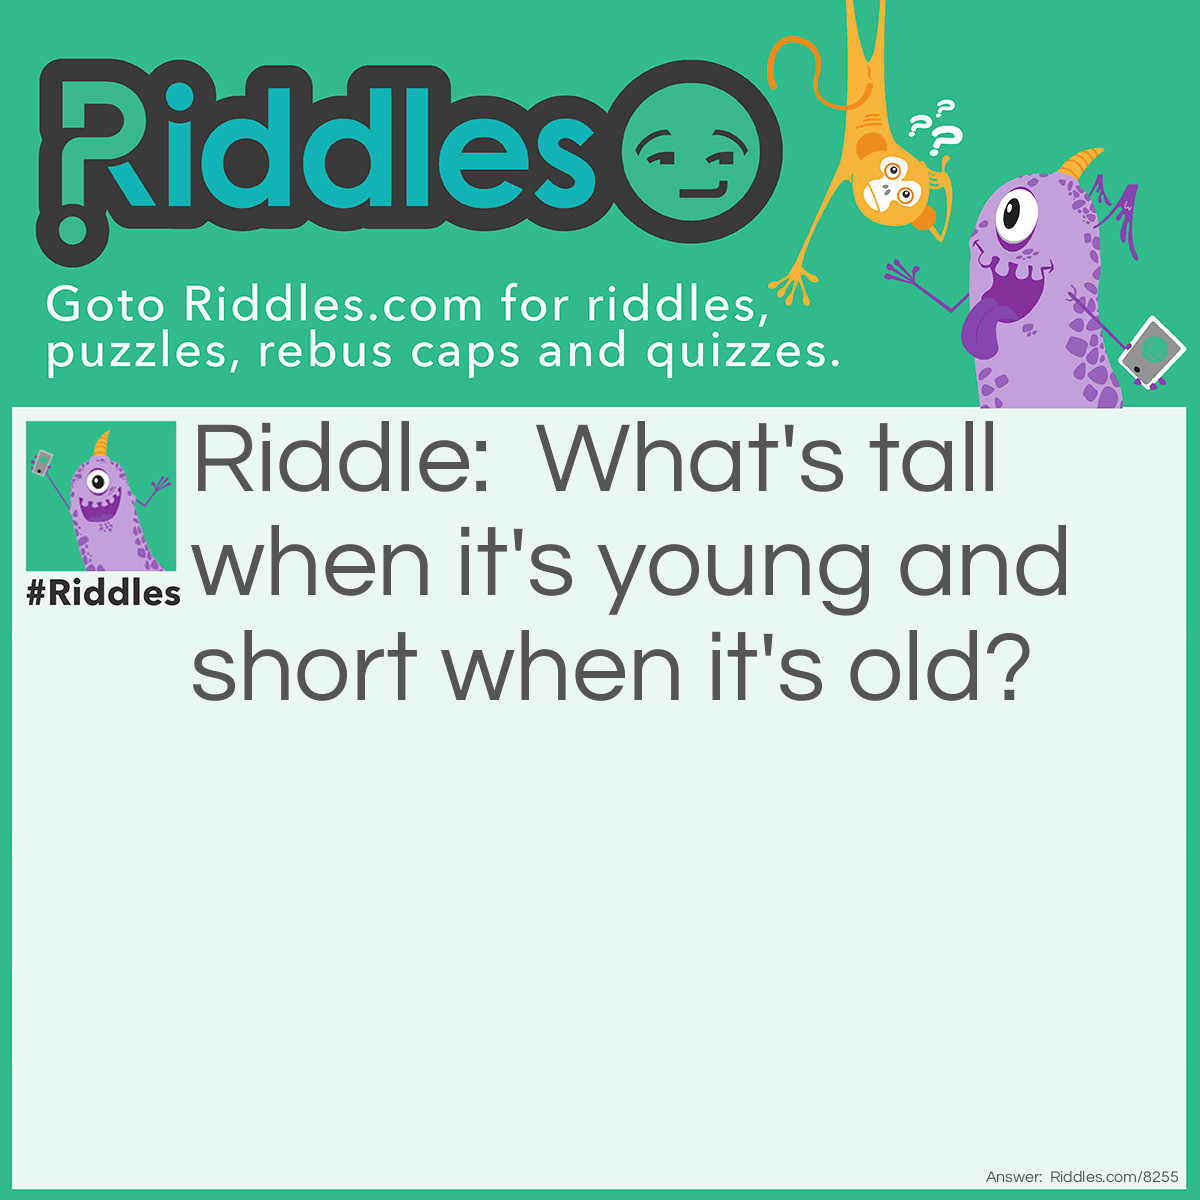 Riddle: What's tall when it's young and short when it's old? Answer: A Candle.